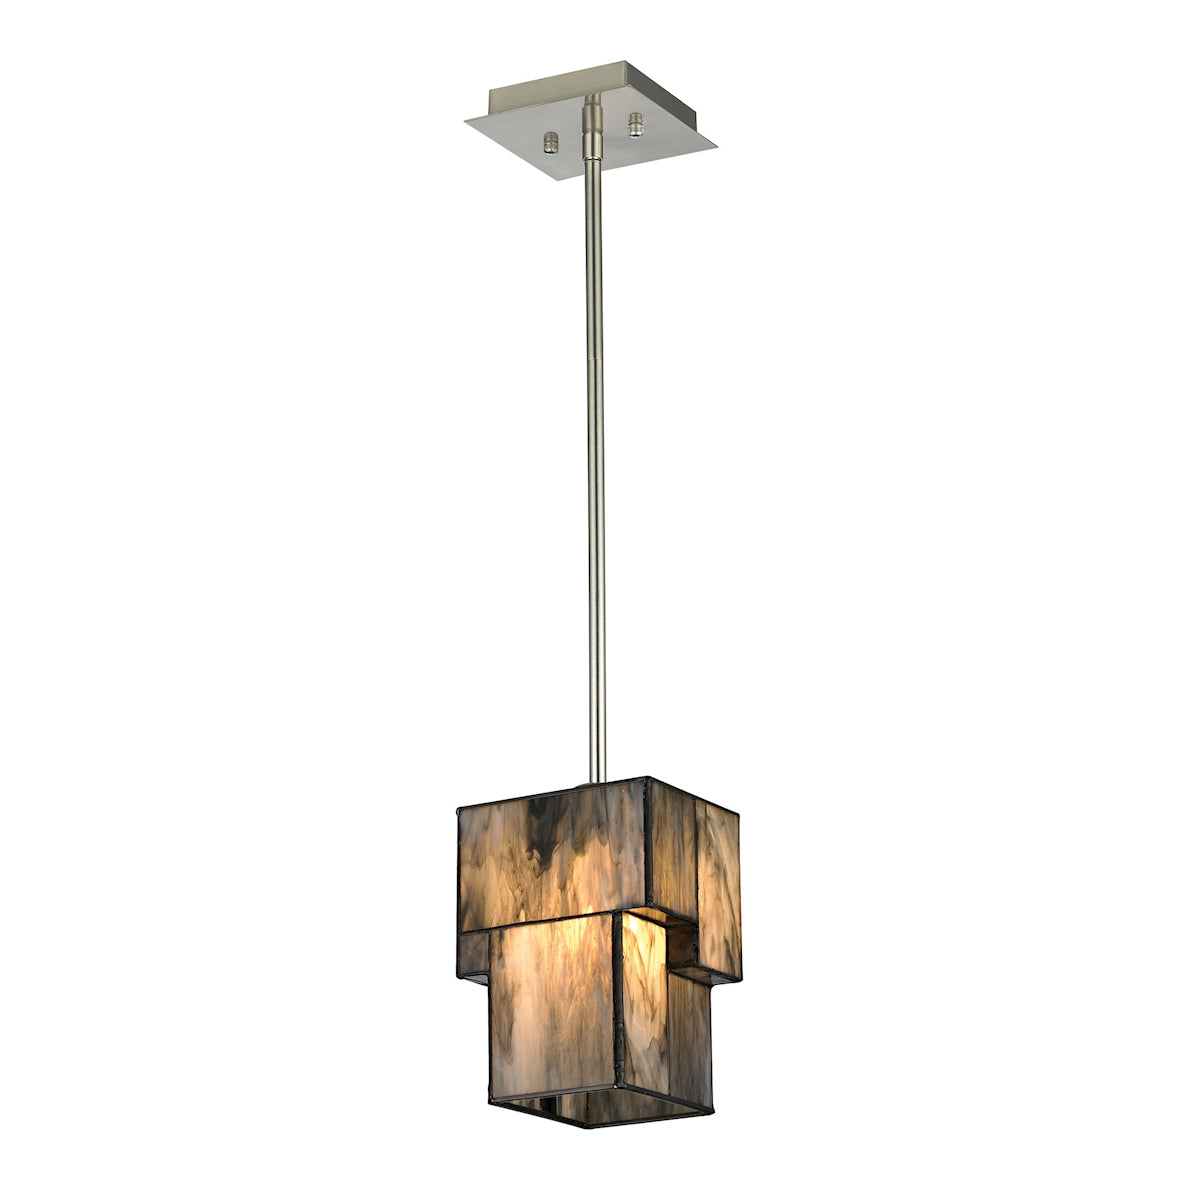 ELK Lighting 72072-1 Cubist 1-Light Mini Pendant in Brushed Nickel with White Tiffany Glass